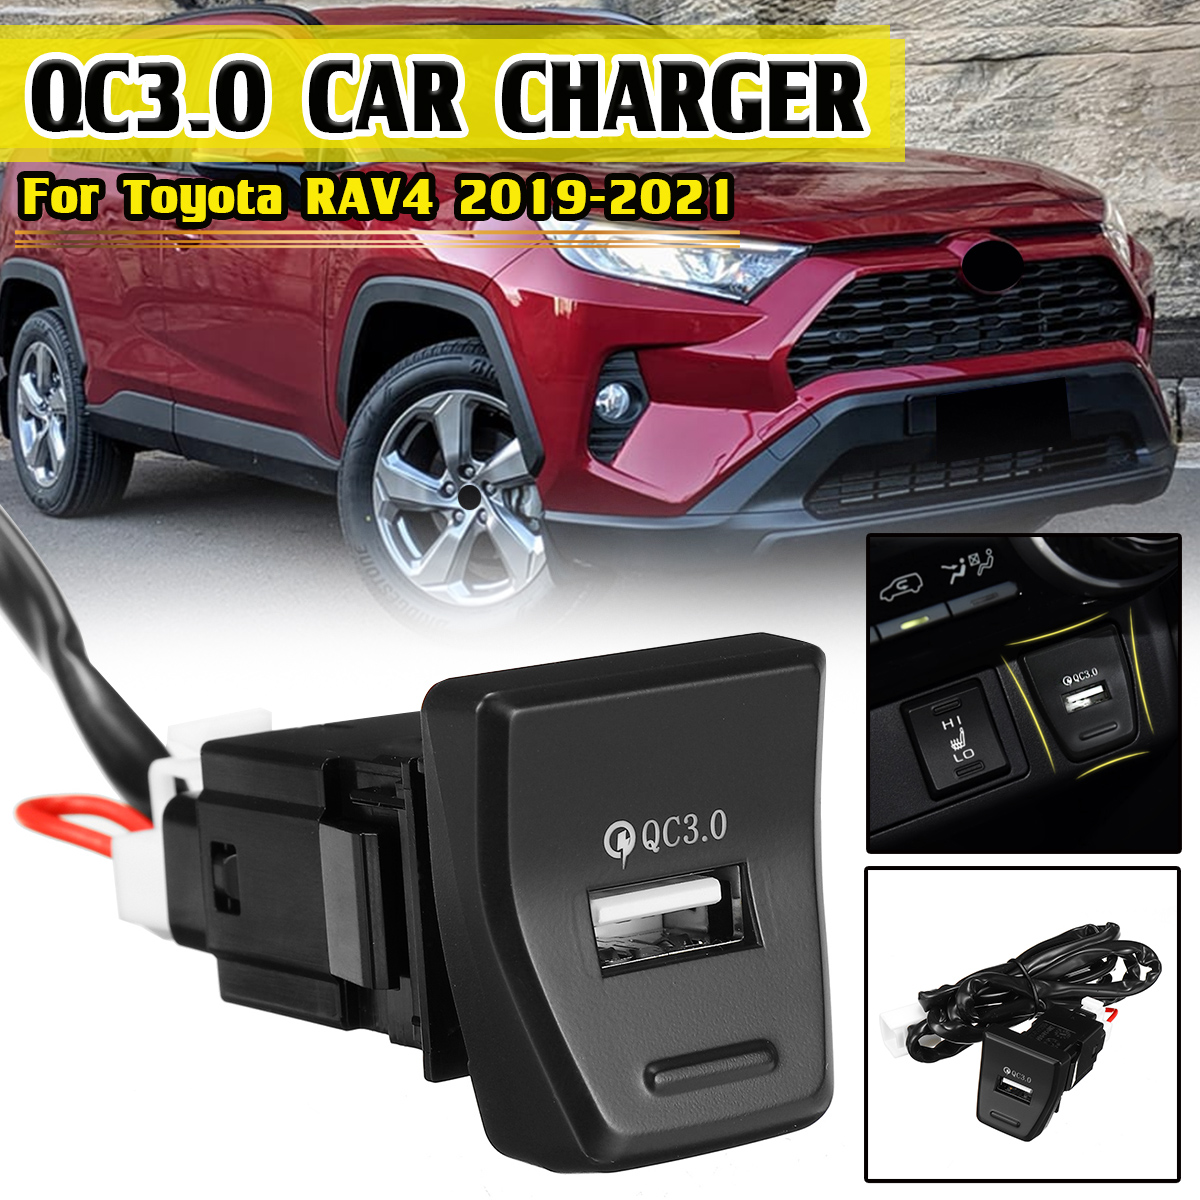 Bakeey-Central-Control-Position-QC30-Car-Charger-For-Toyota-RAV4-2019-2020-2021-Bouton-Backlight-5th-1885890-1